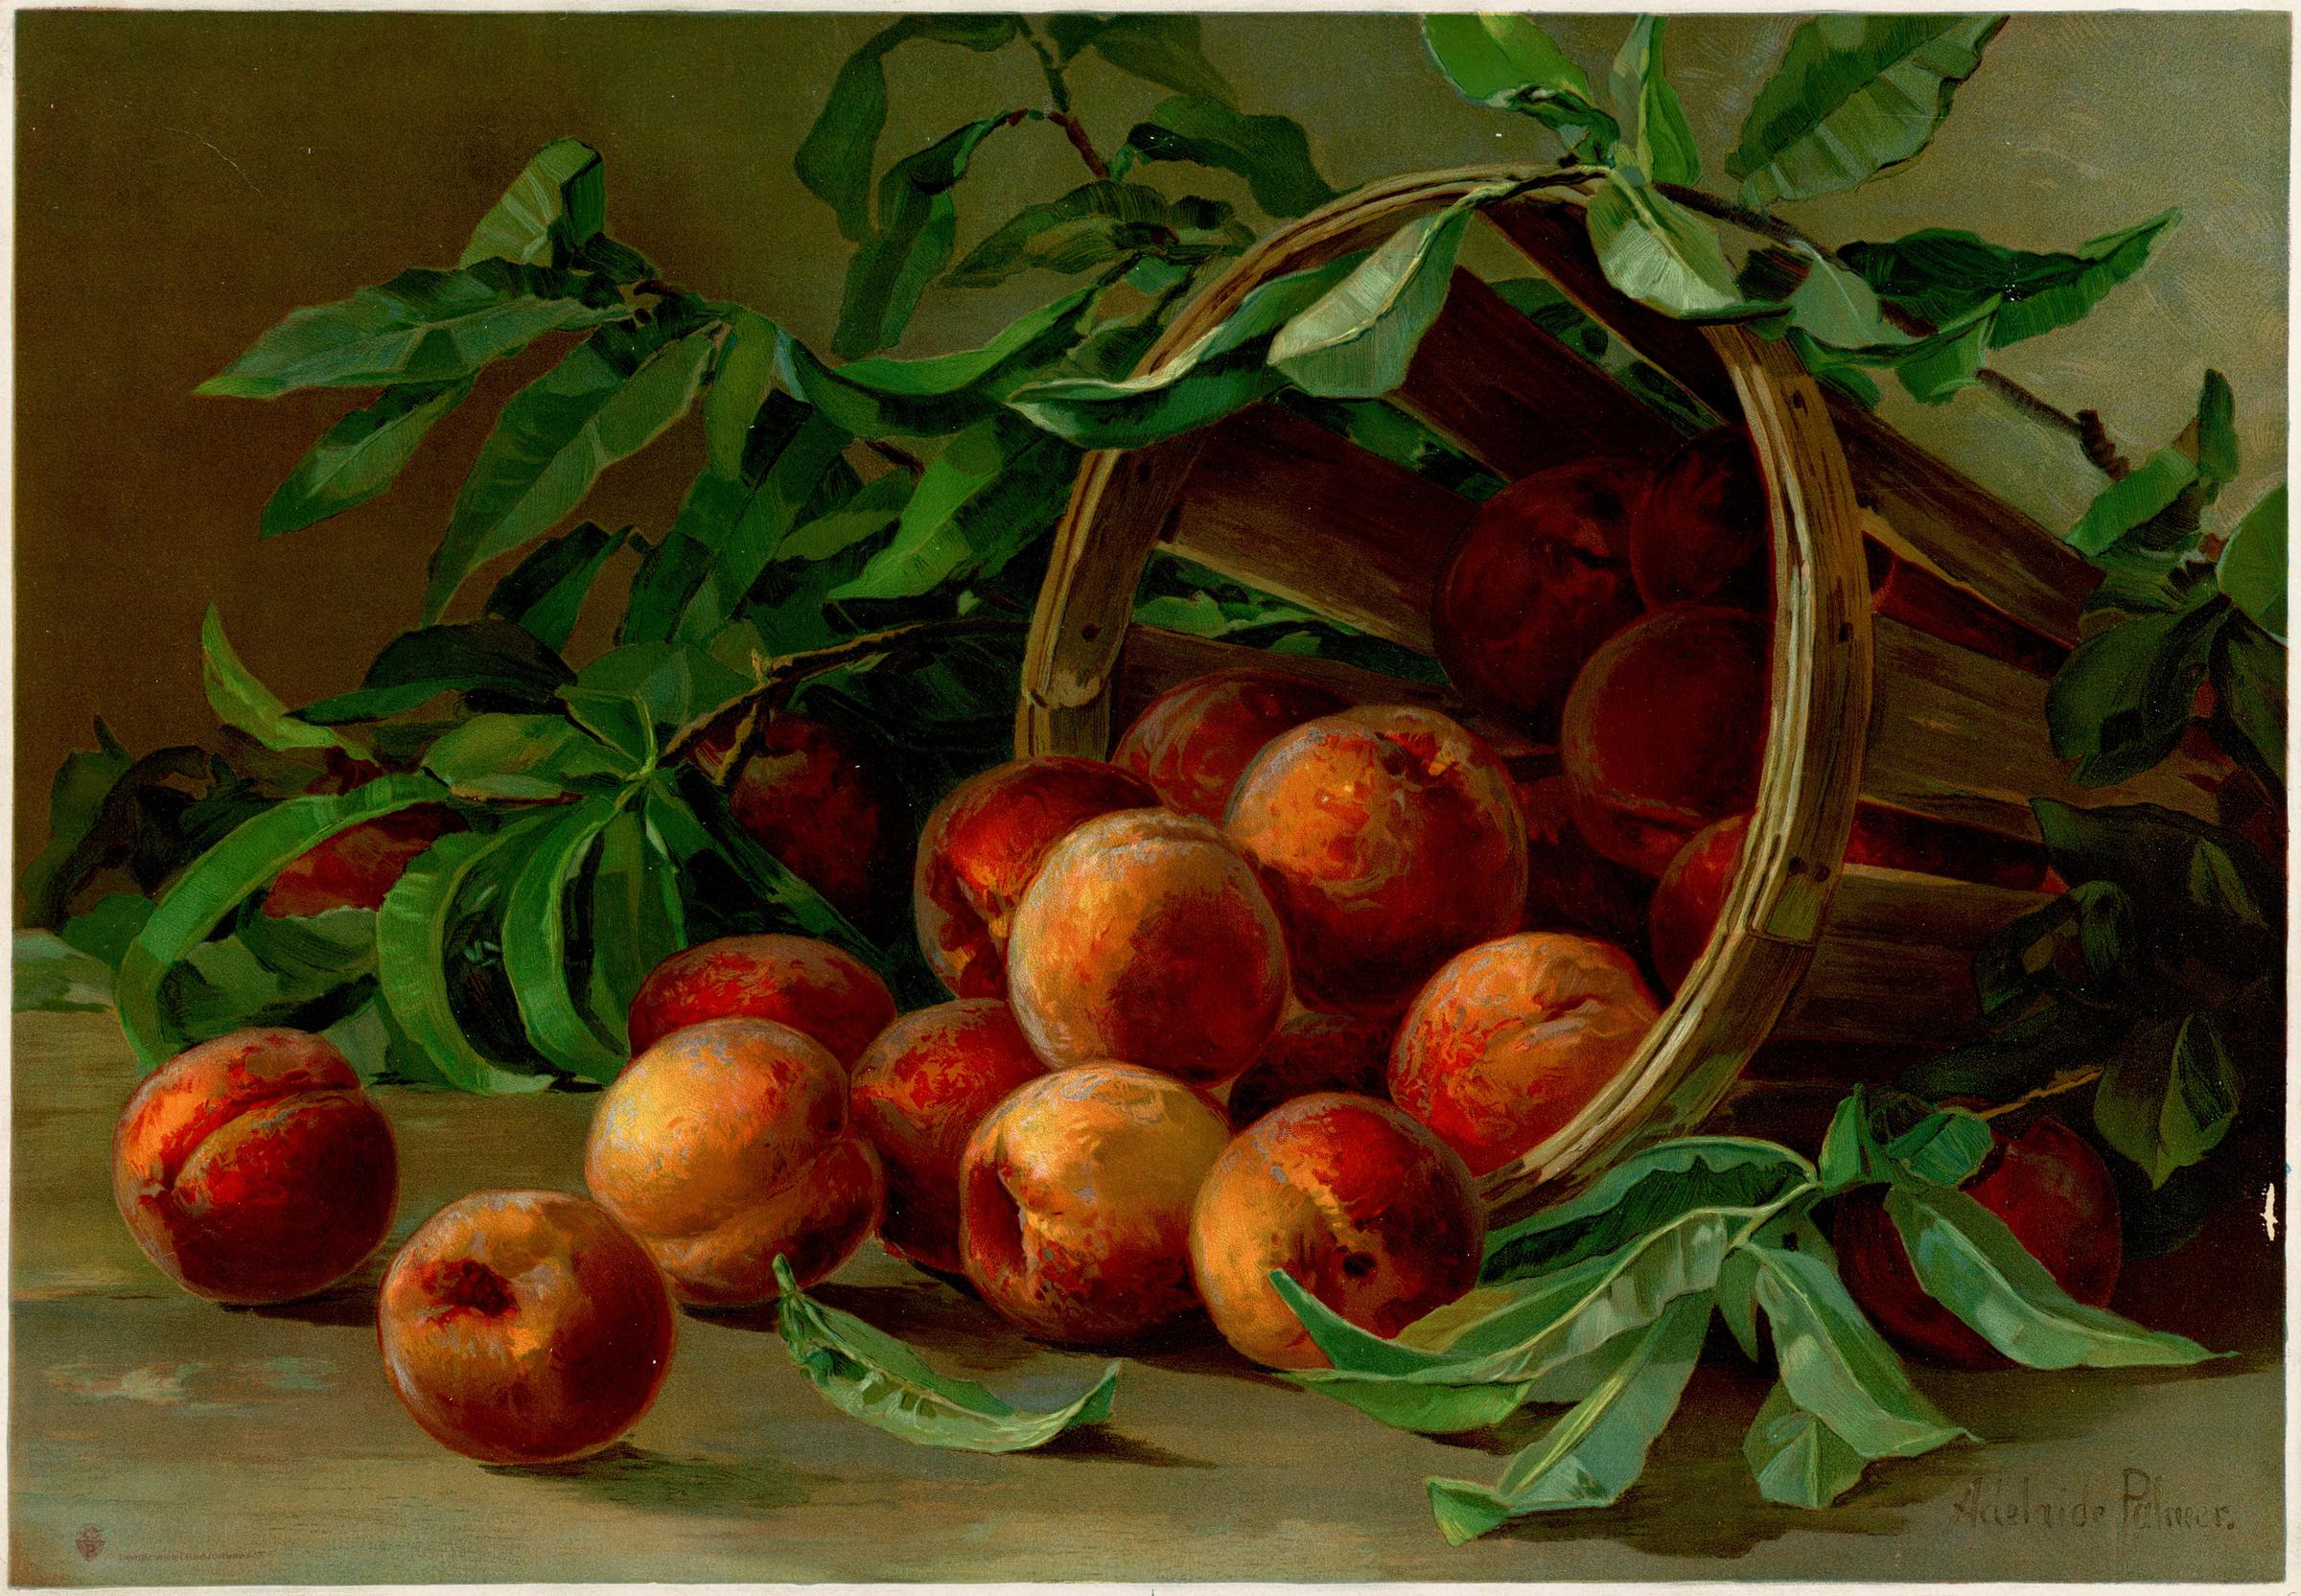 Peaches in Basket by Adelaide Palmer, circa 1894